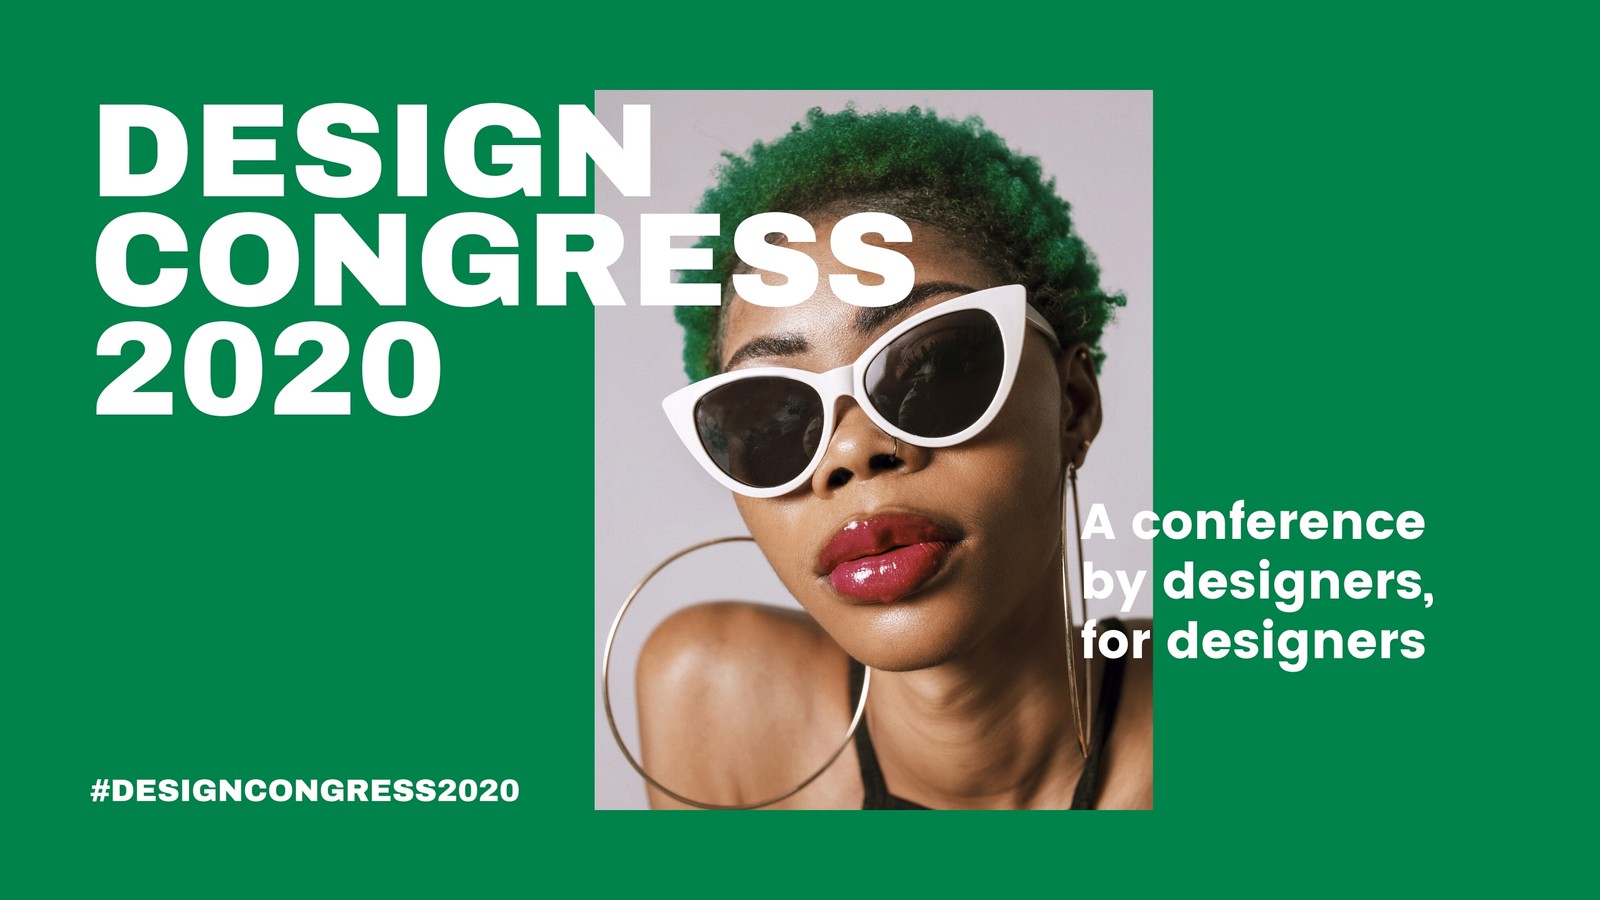 Green and White Trendy Design Conference Events and Special Interest Presentation